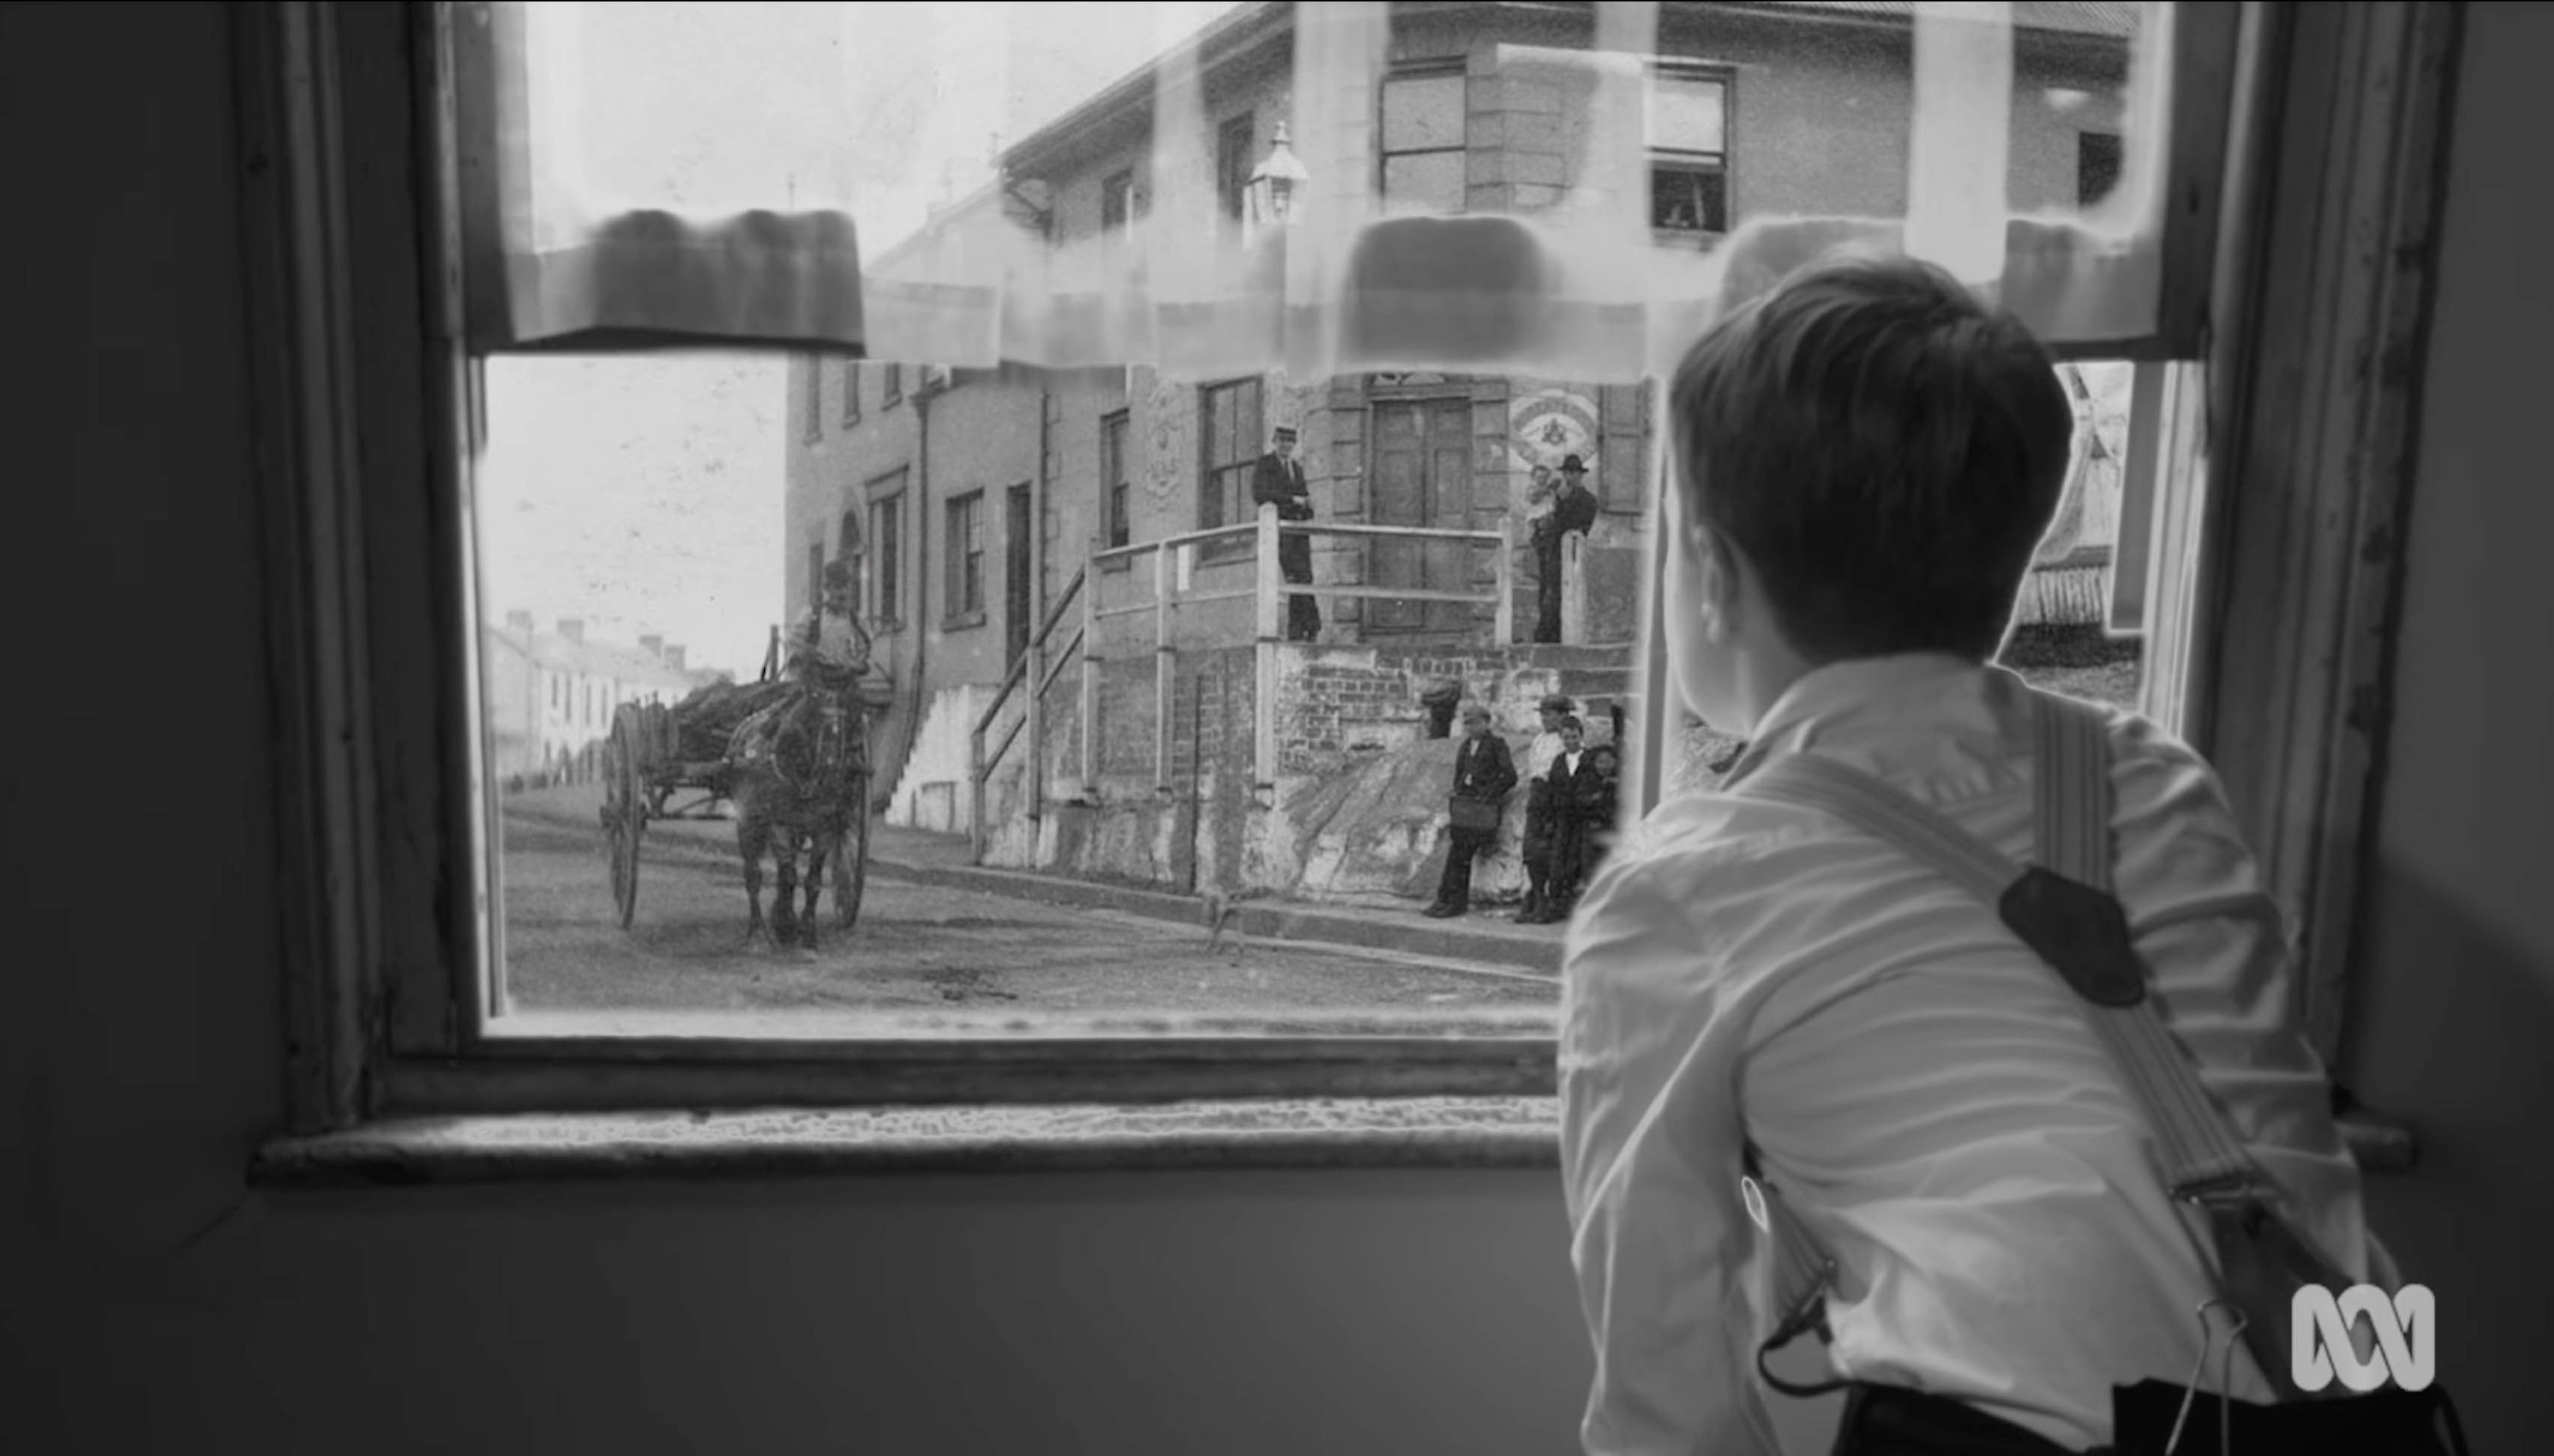 Black and white image of a boy looking out a window